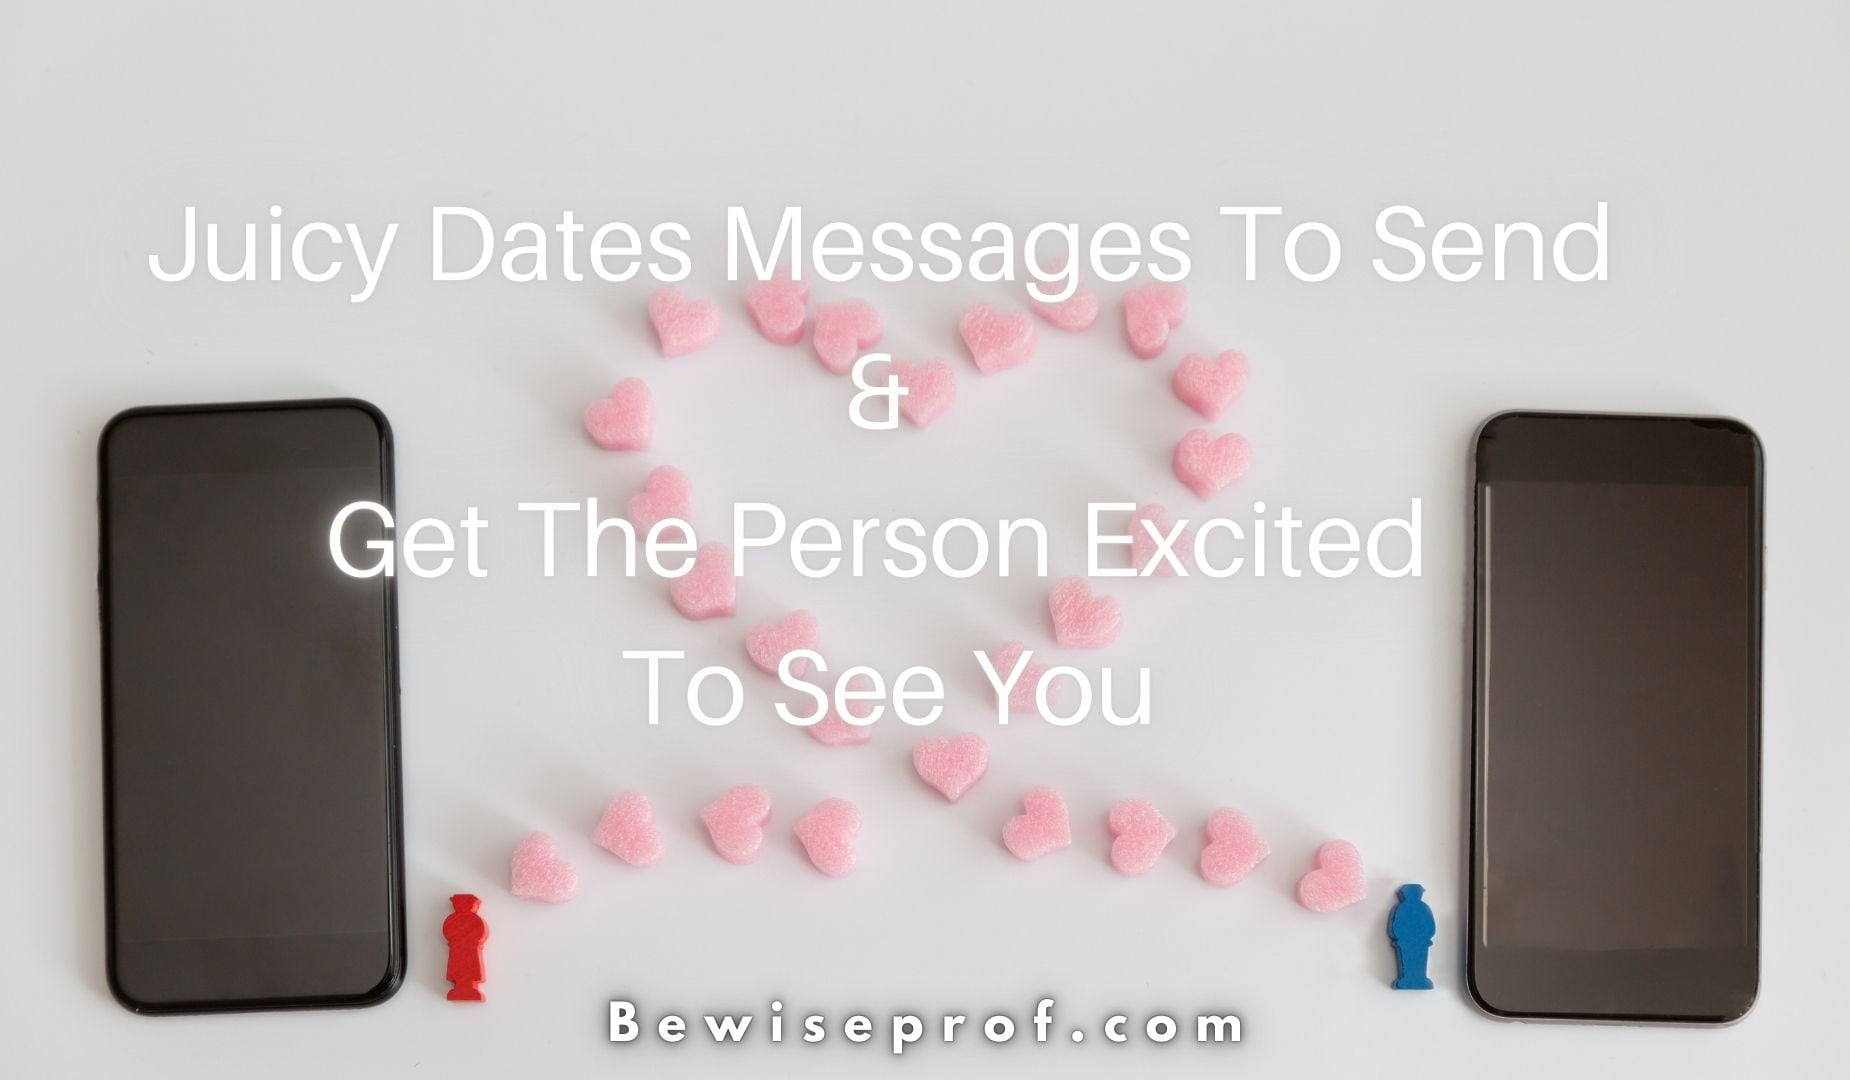 Juicy Dates Messages To Send And Get The Person Excited To See You